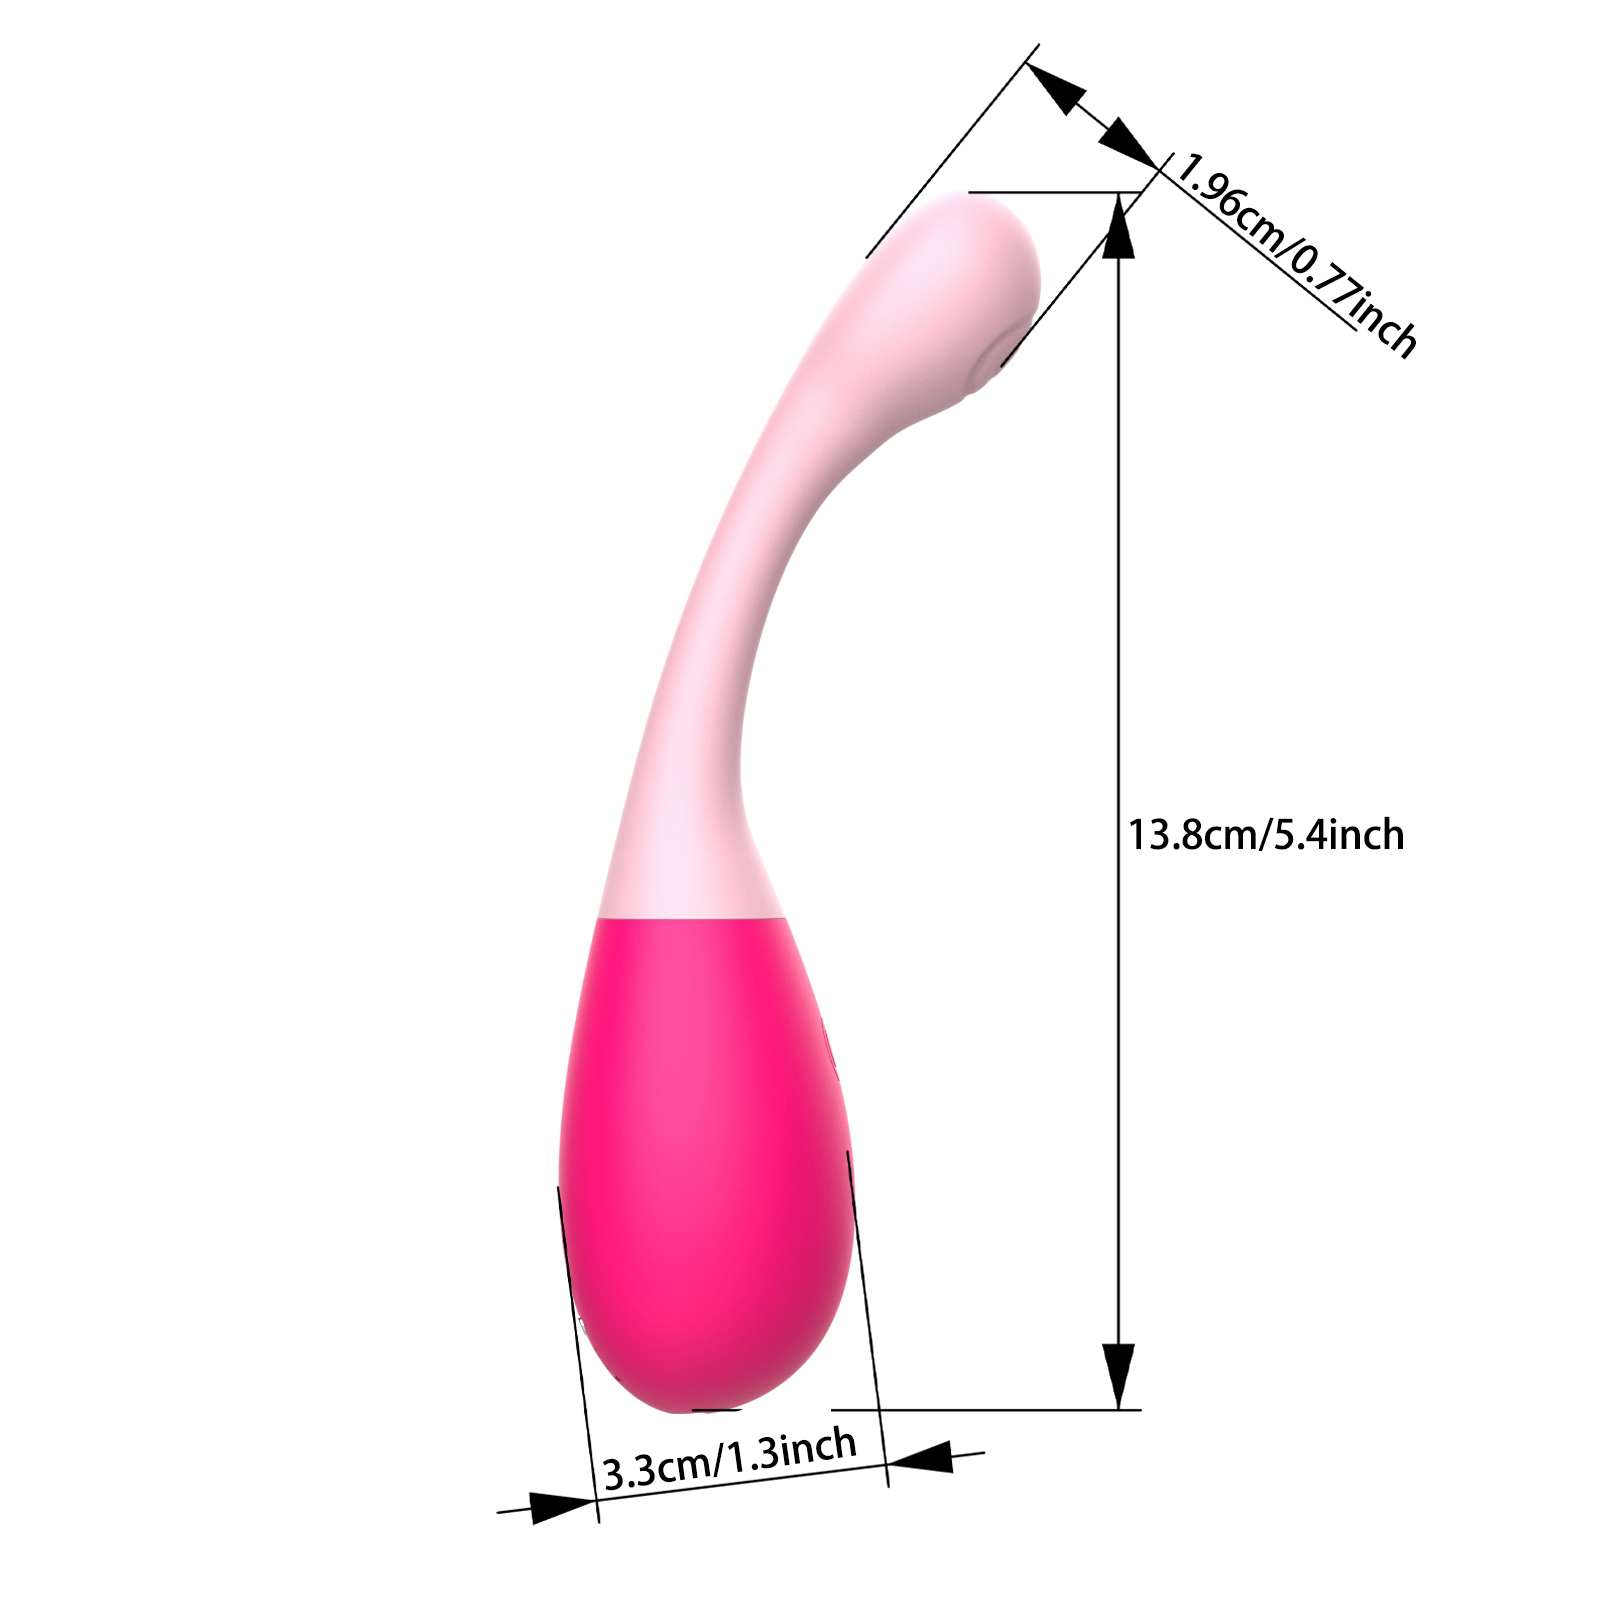 A penis vibrator is a specialized sex toy designed to provide enhanced stimulation and pleasure to the penis.